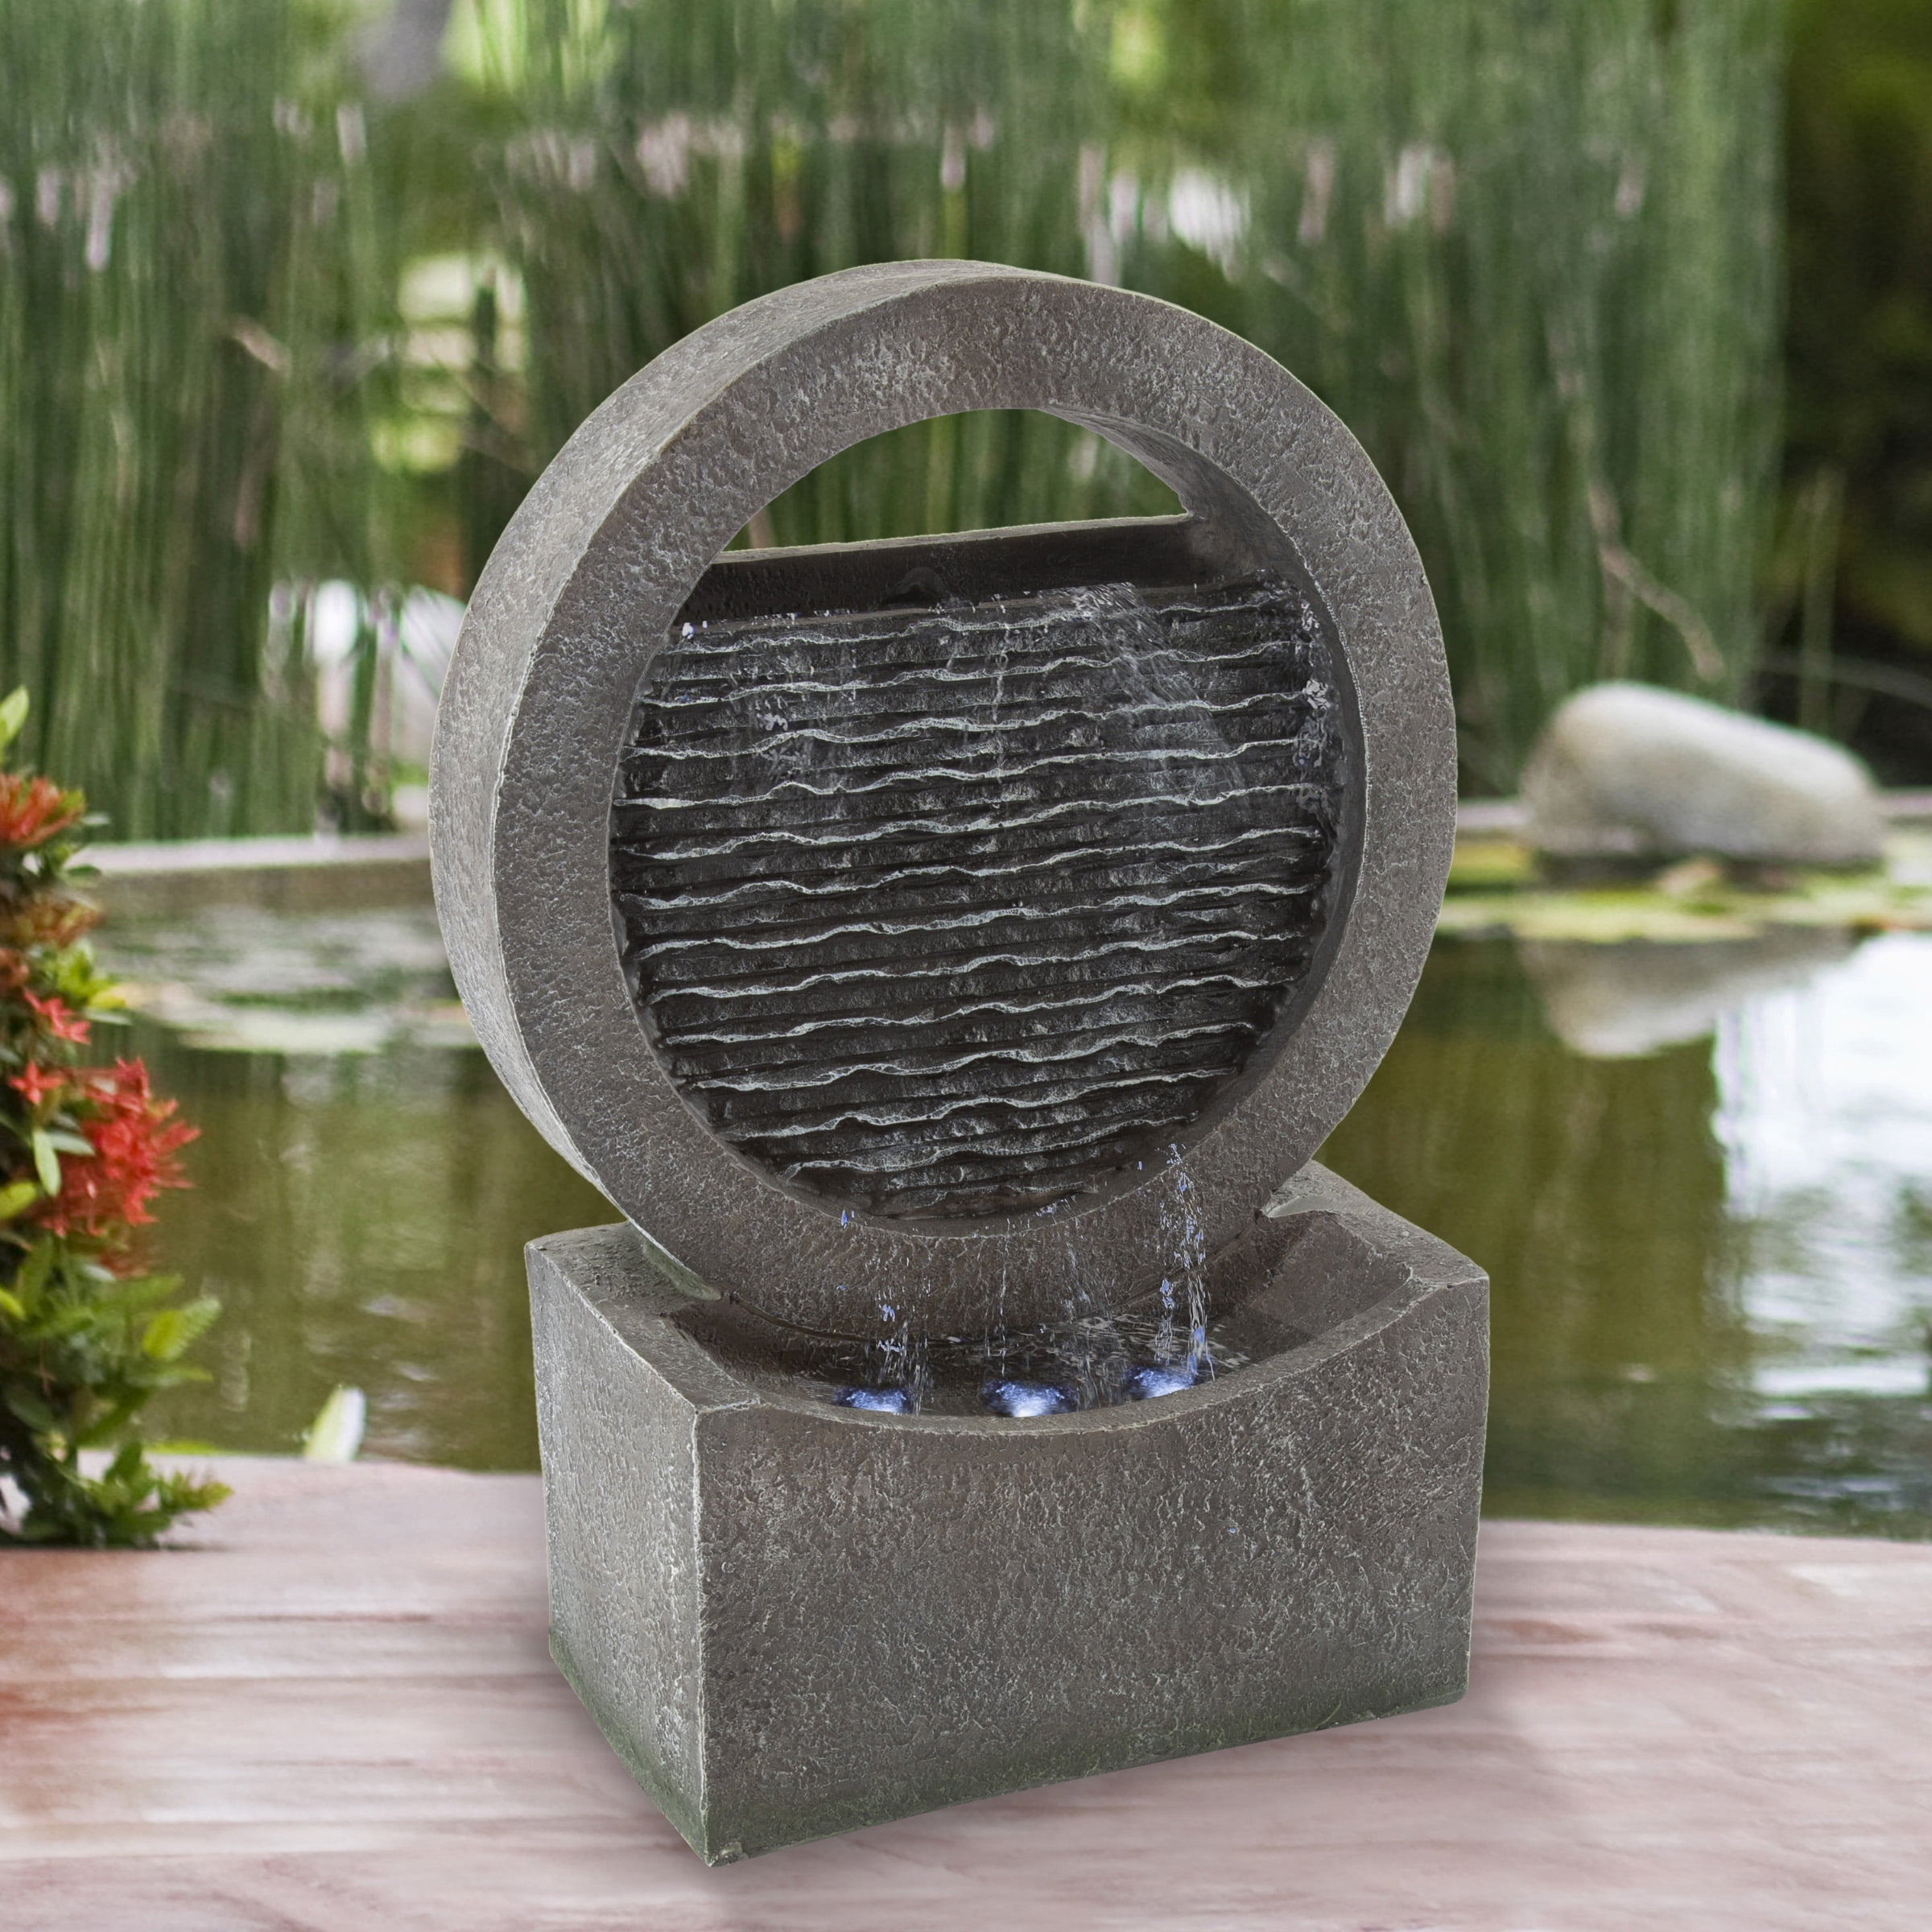 KITGARN Swimming Pool Fountain 17.7 x 11.8 x 23.6 Stainless Steel Pool Waterfall Fountain Silver For In Ground Pools Garden Outdoor Waterfalls Sheer Descent Pond Water Feature